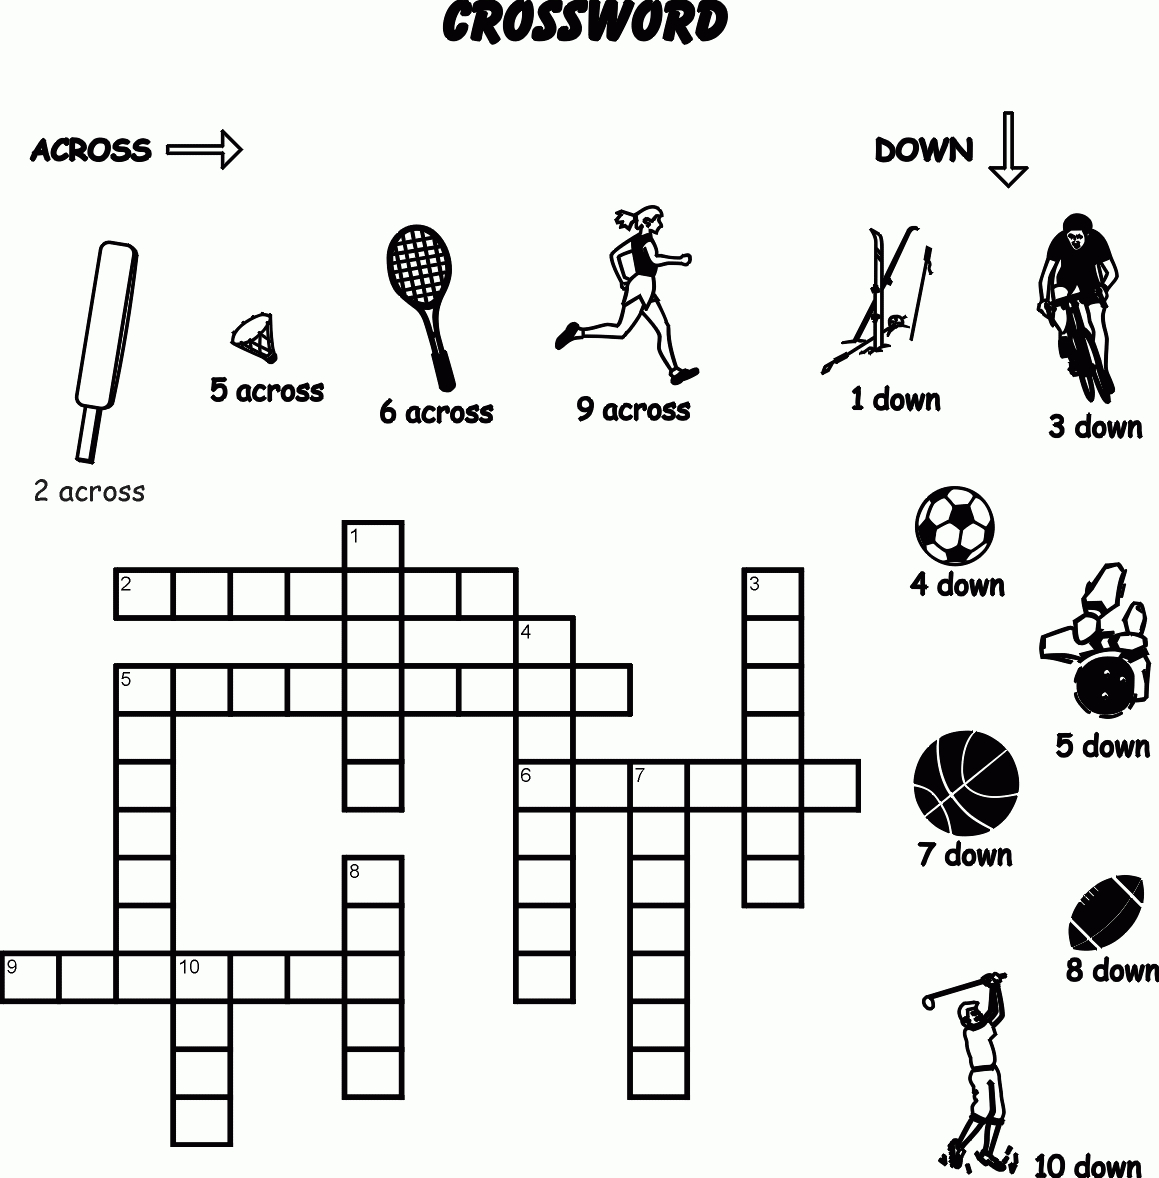 14 Sports Crossword Puzzles | Kittybabylove - Printable Sports Related Crossword Puzzles